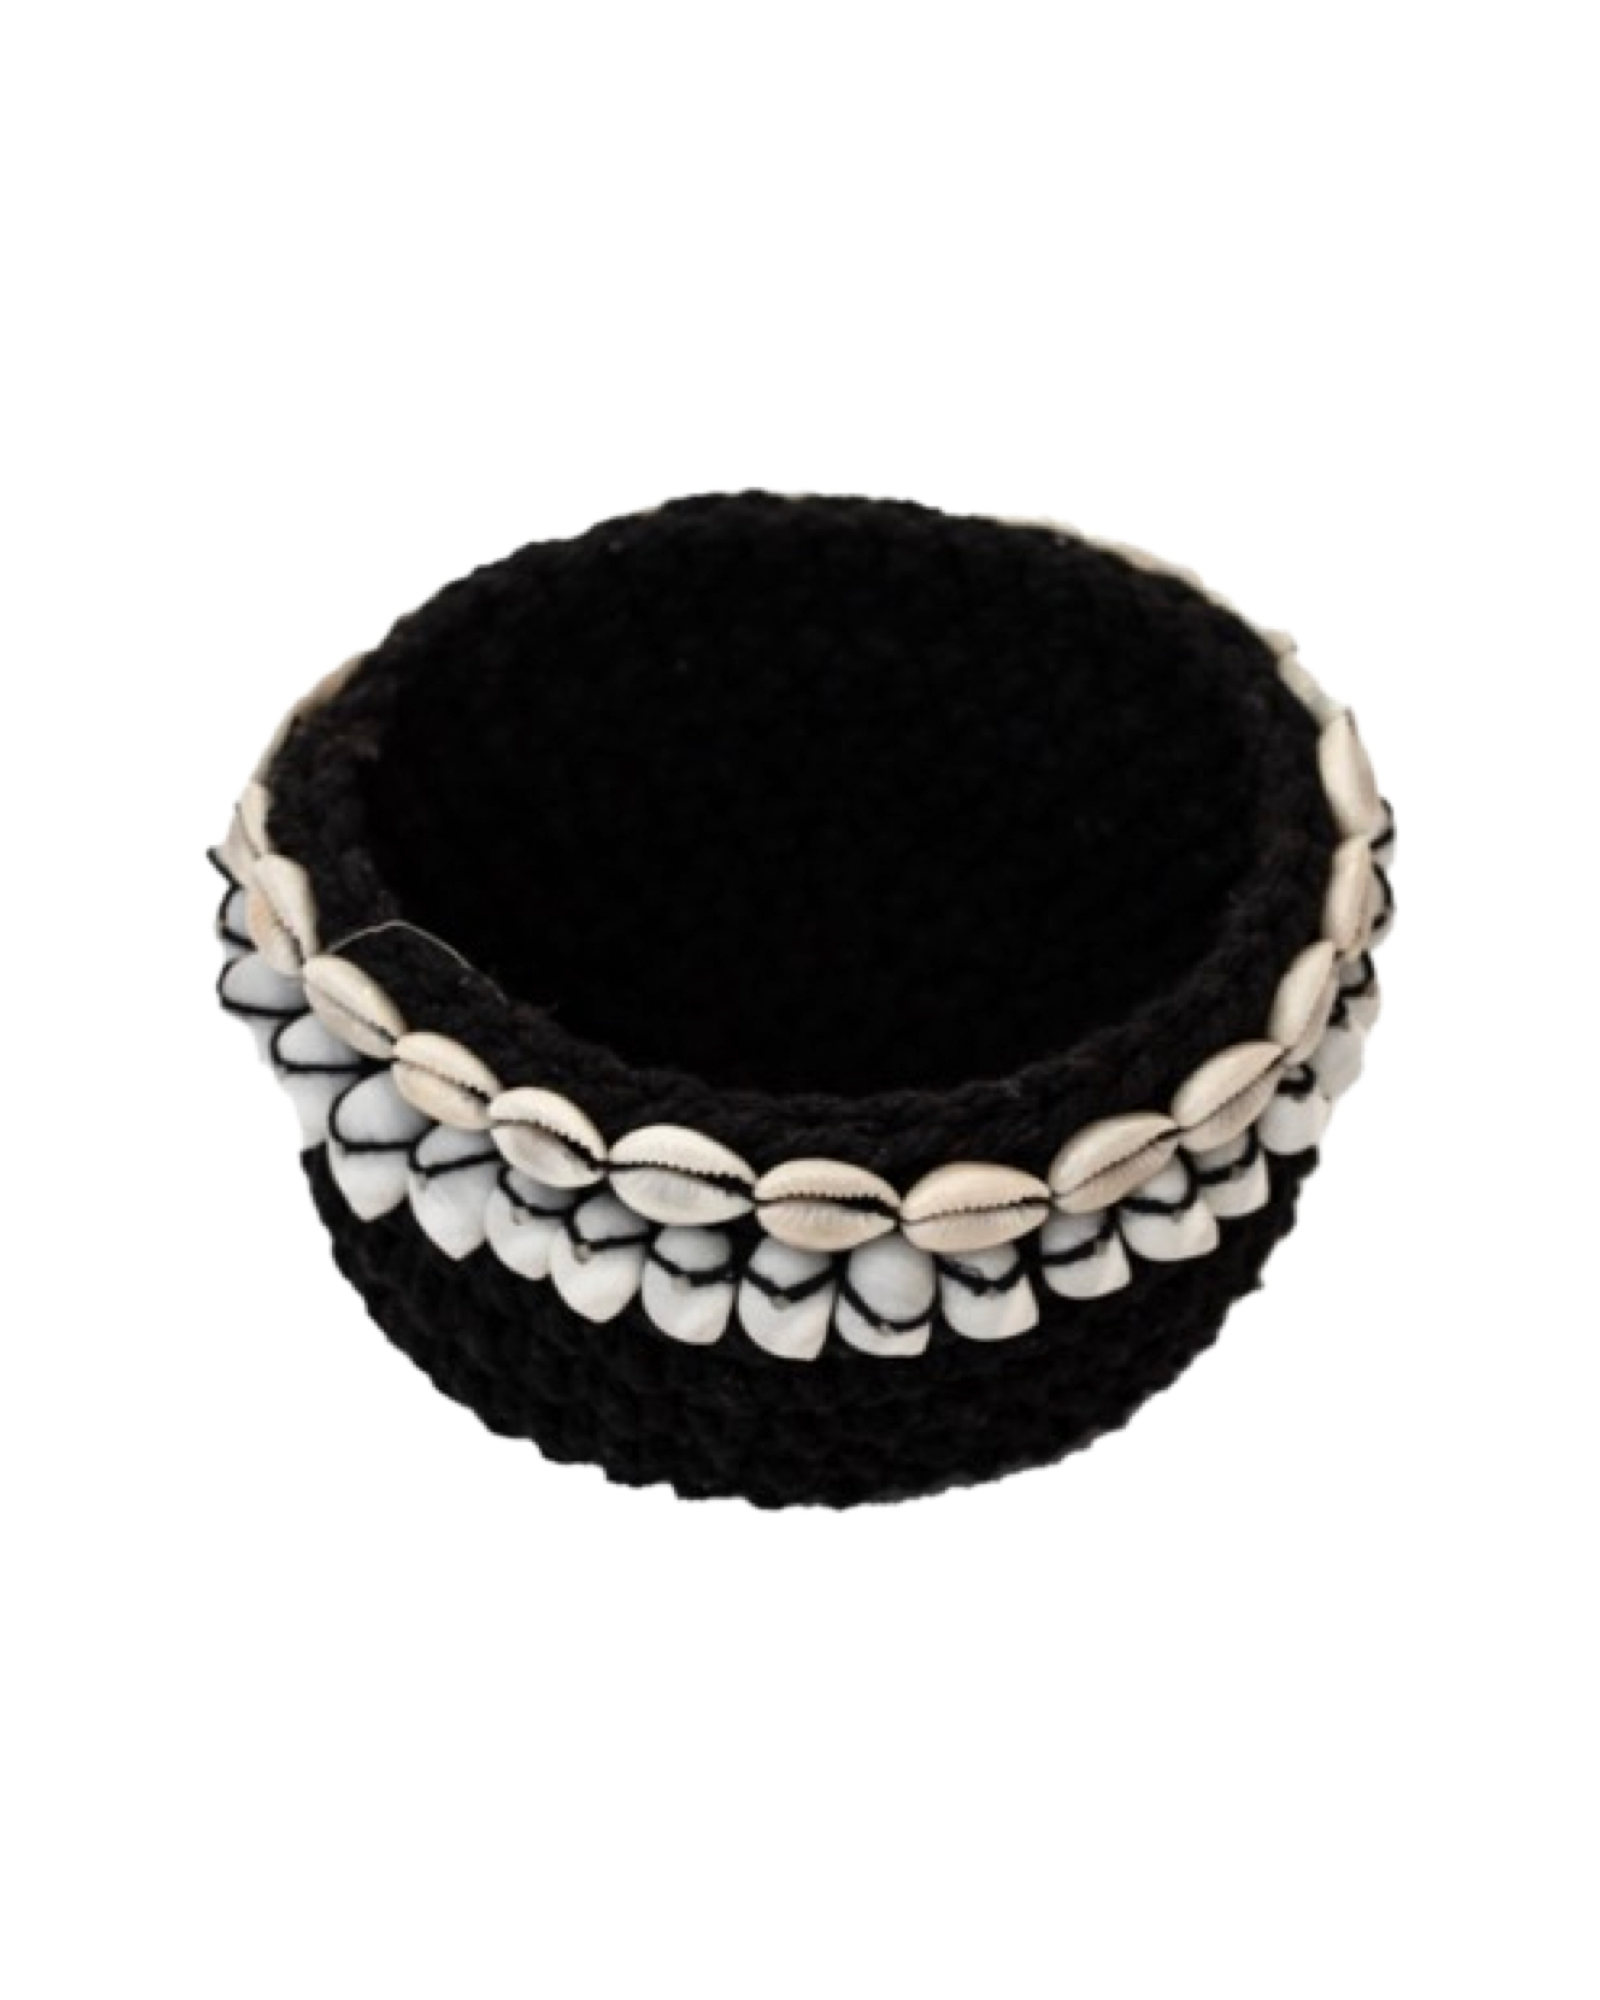 A small black crochet basket with white shells wrapped around the basket. 